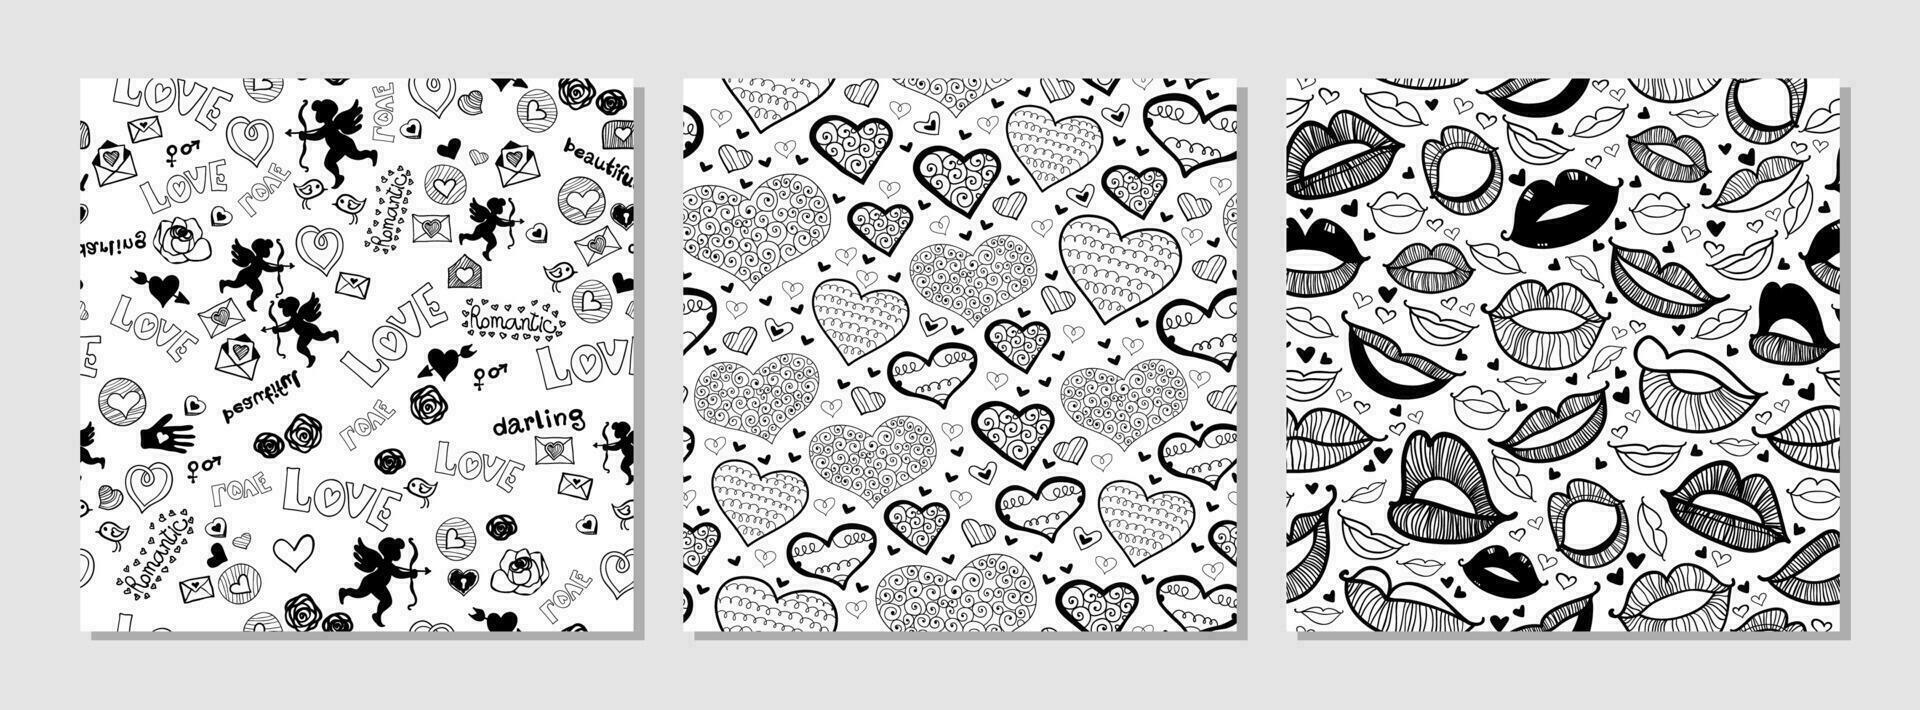 Heart doodles seamless pattern. Love illustration hearts hand drawn background. vector